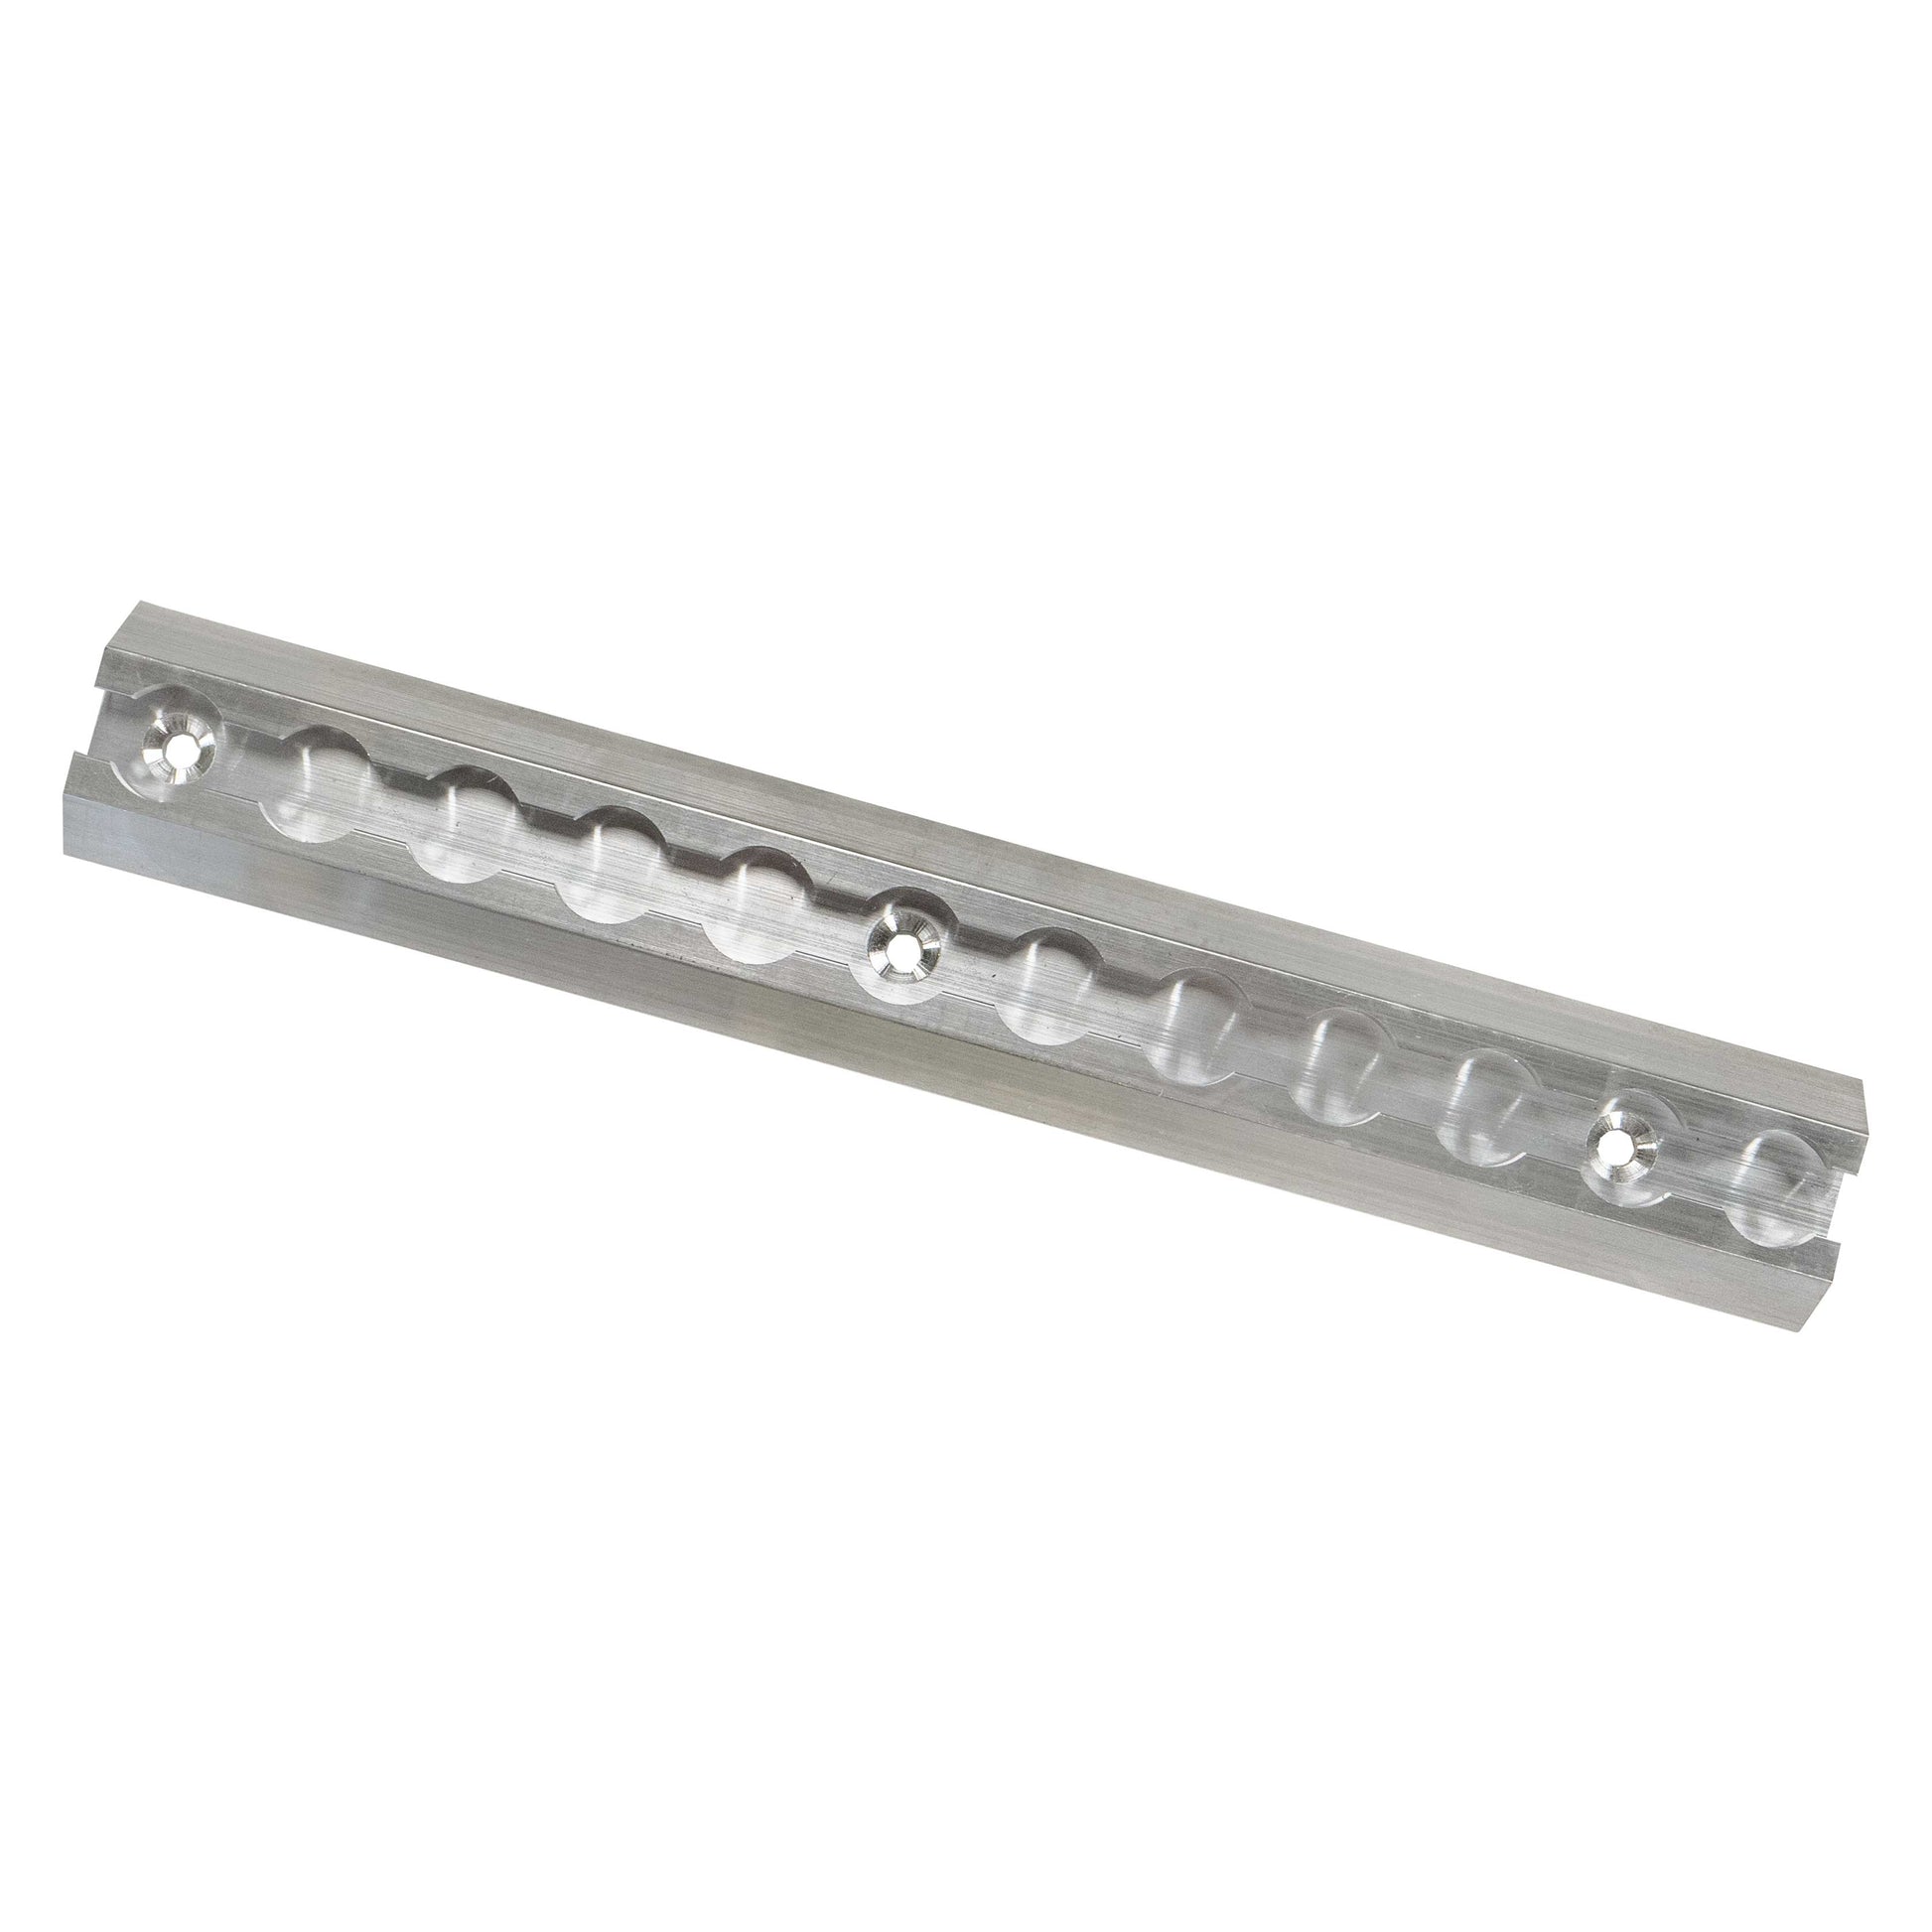 12 inch AirlineStyle Angled Track Aluminum image 1 of 7